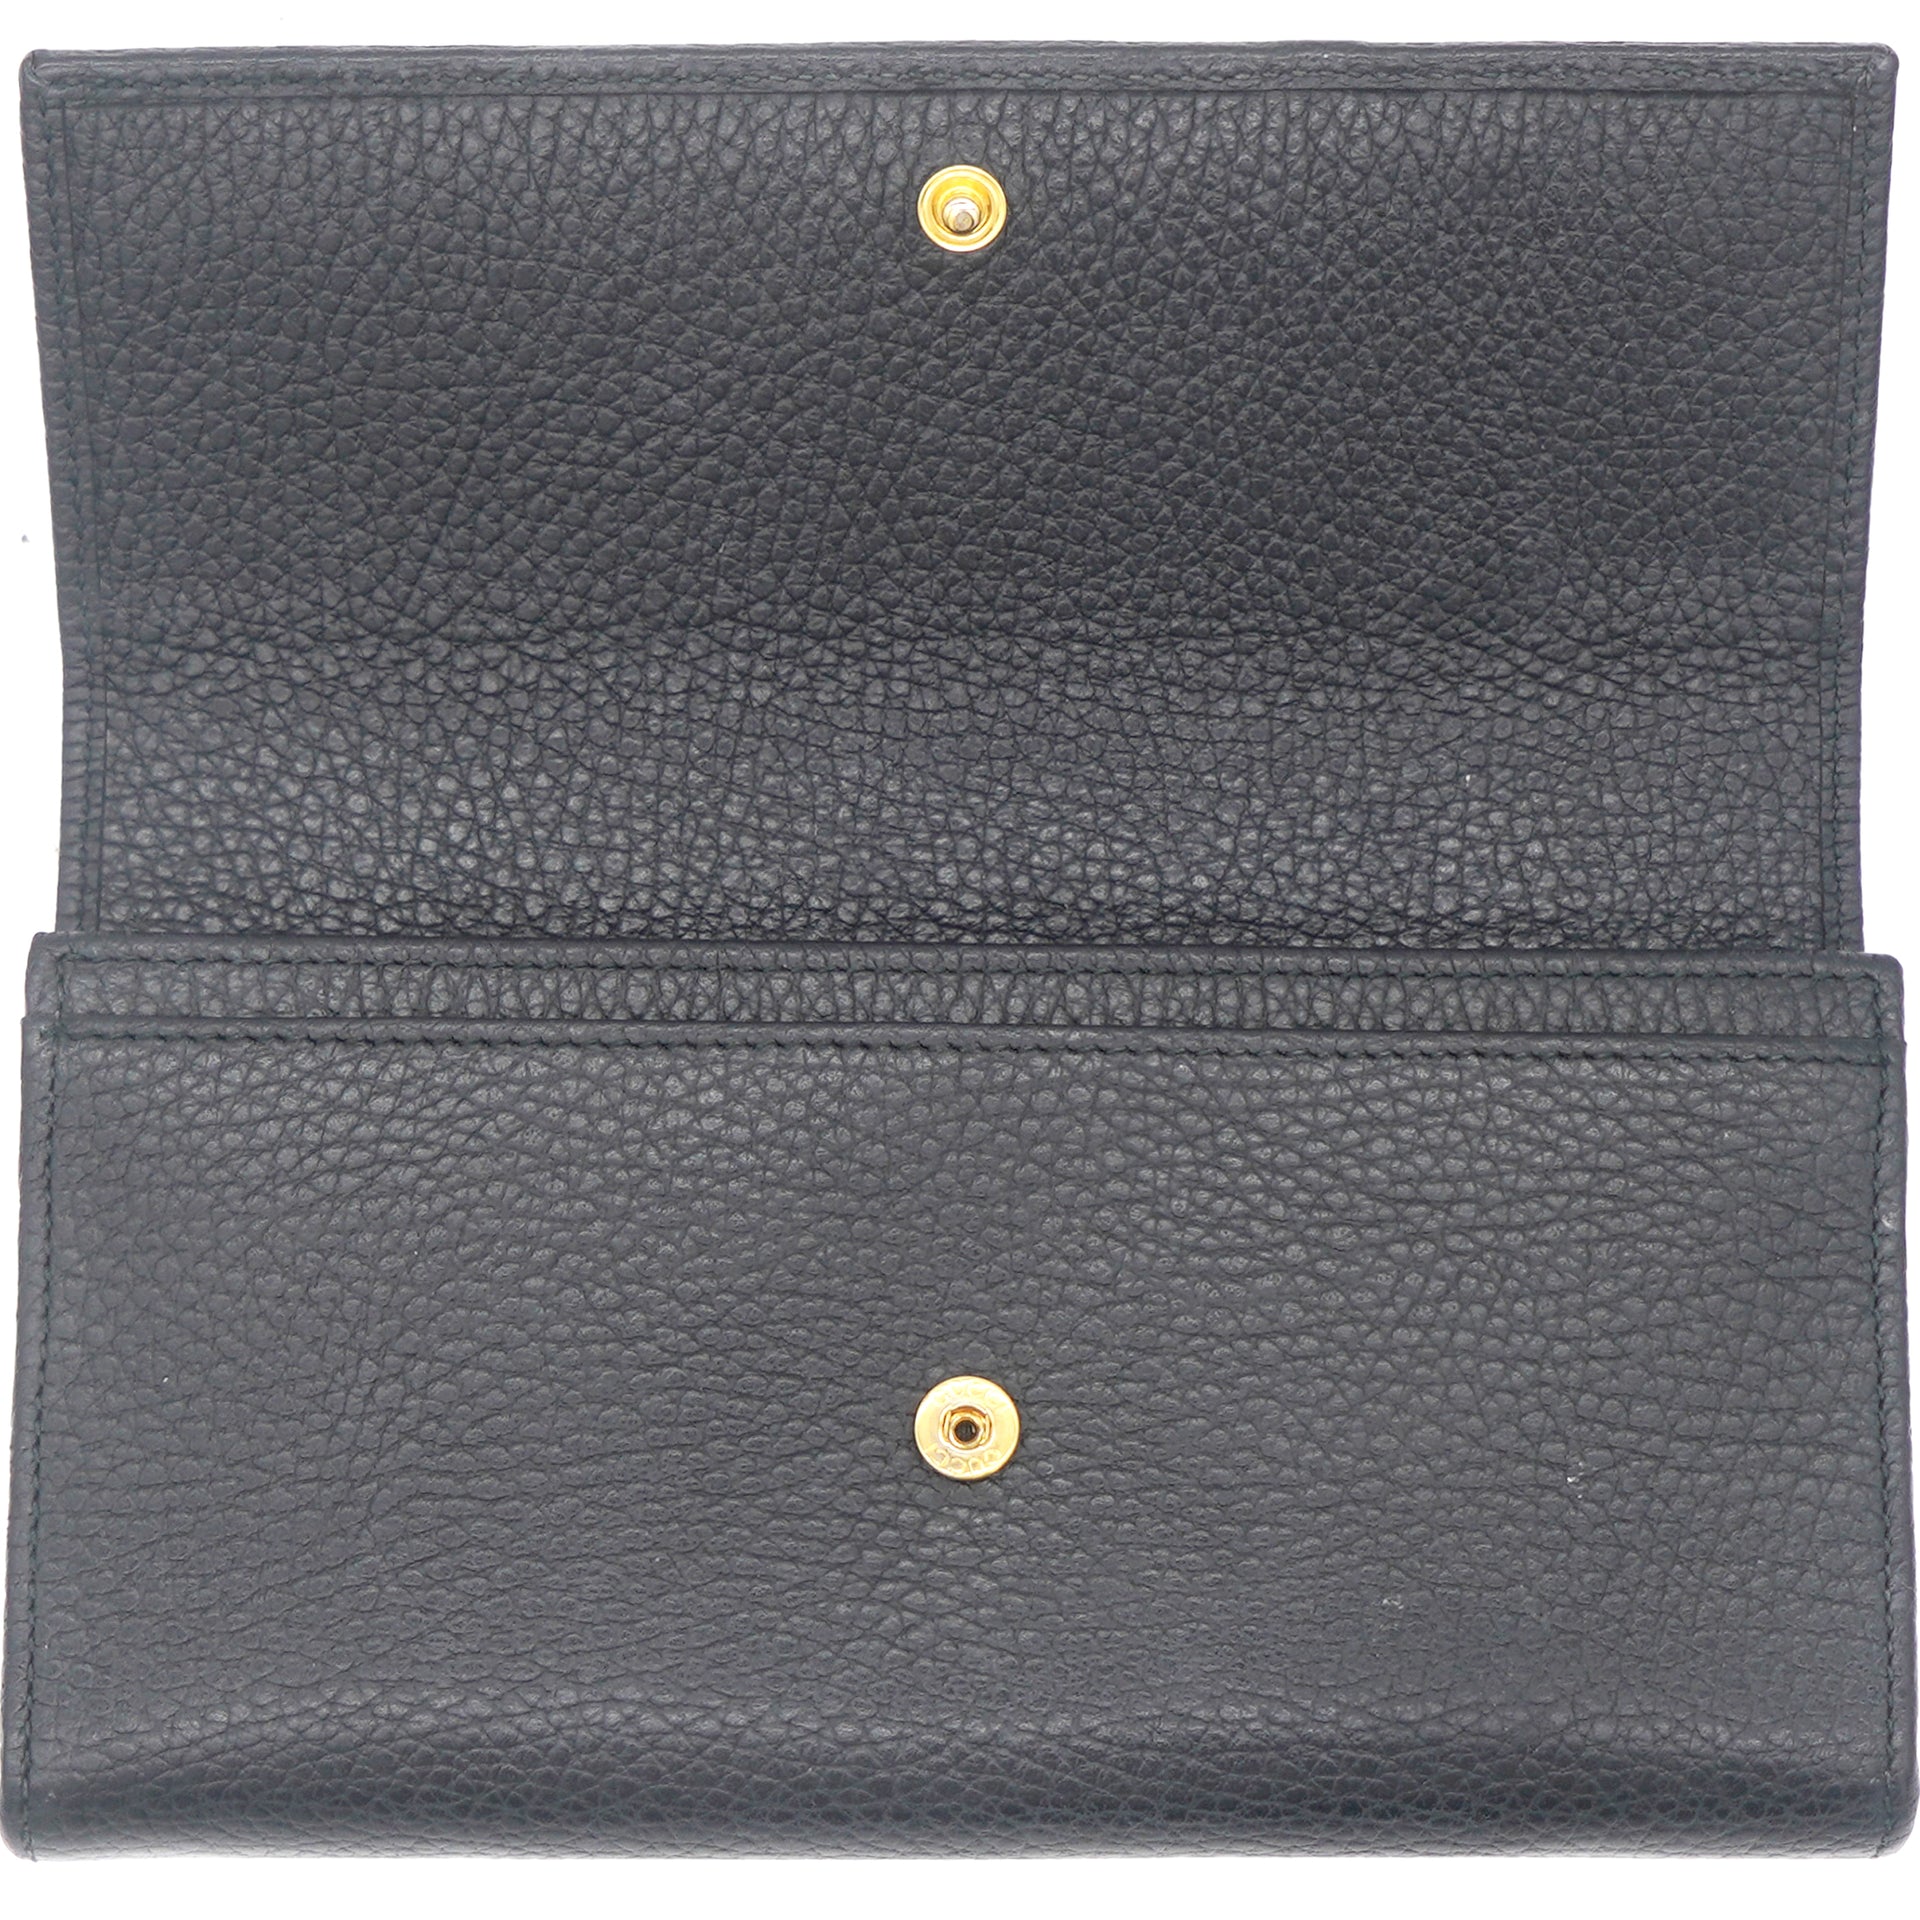 Marmont leather continental wallet